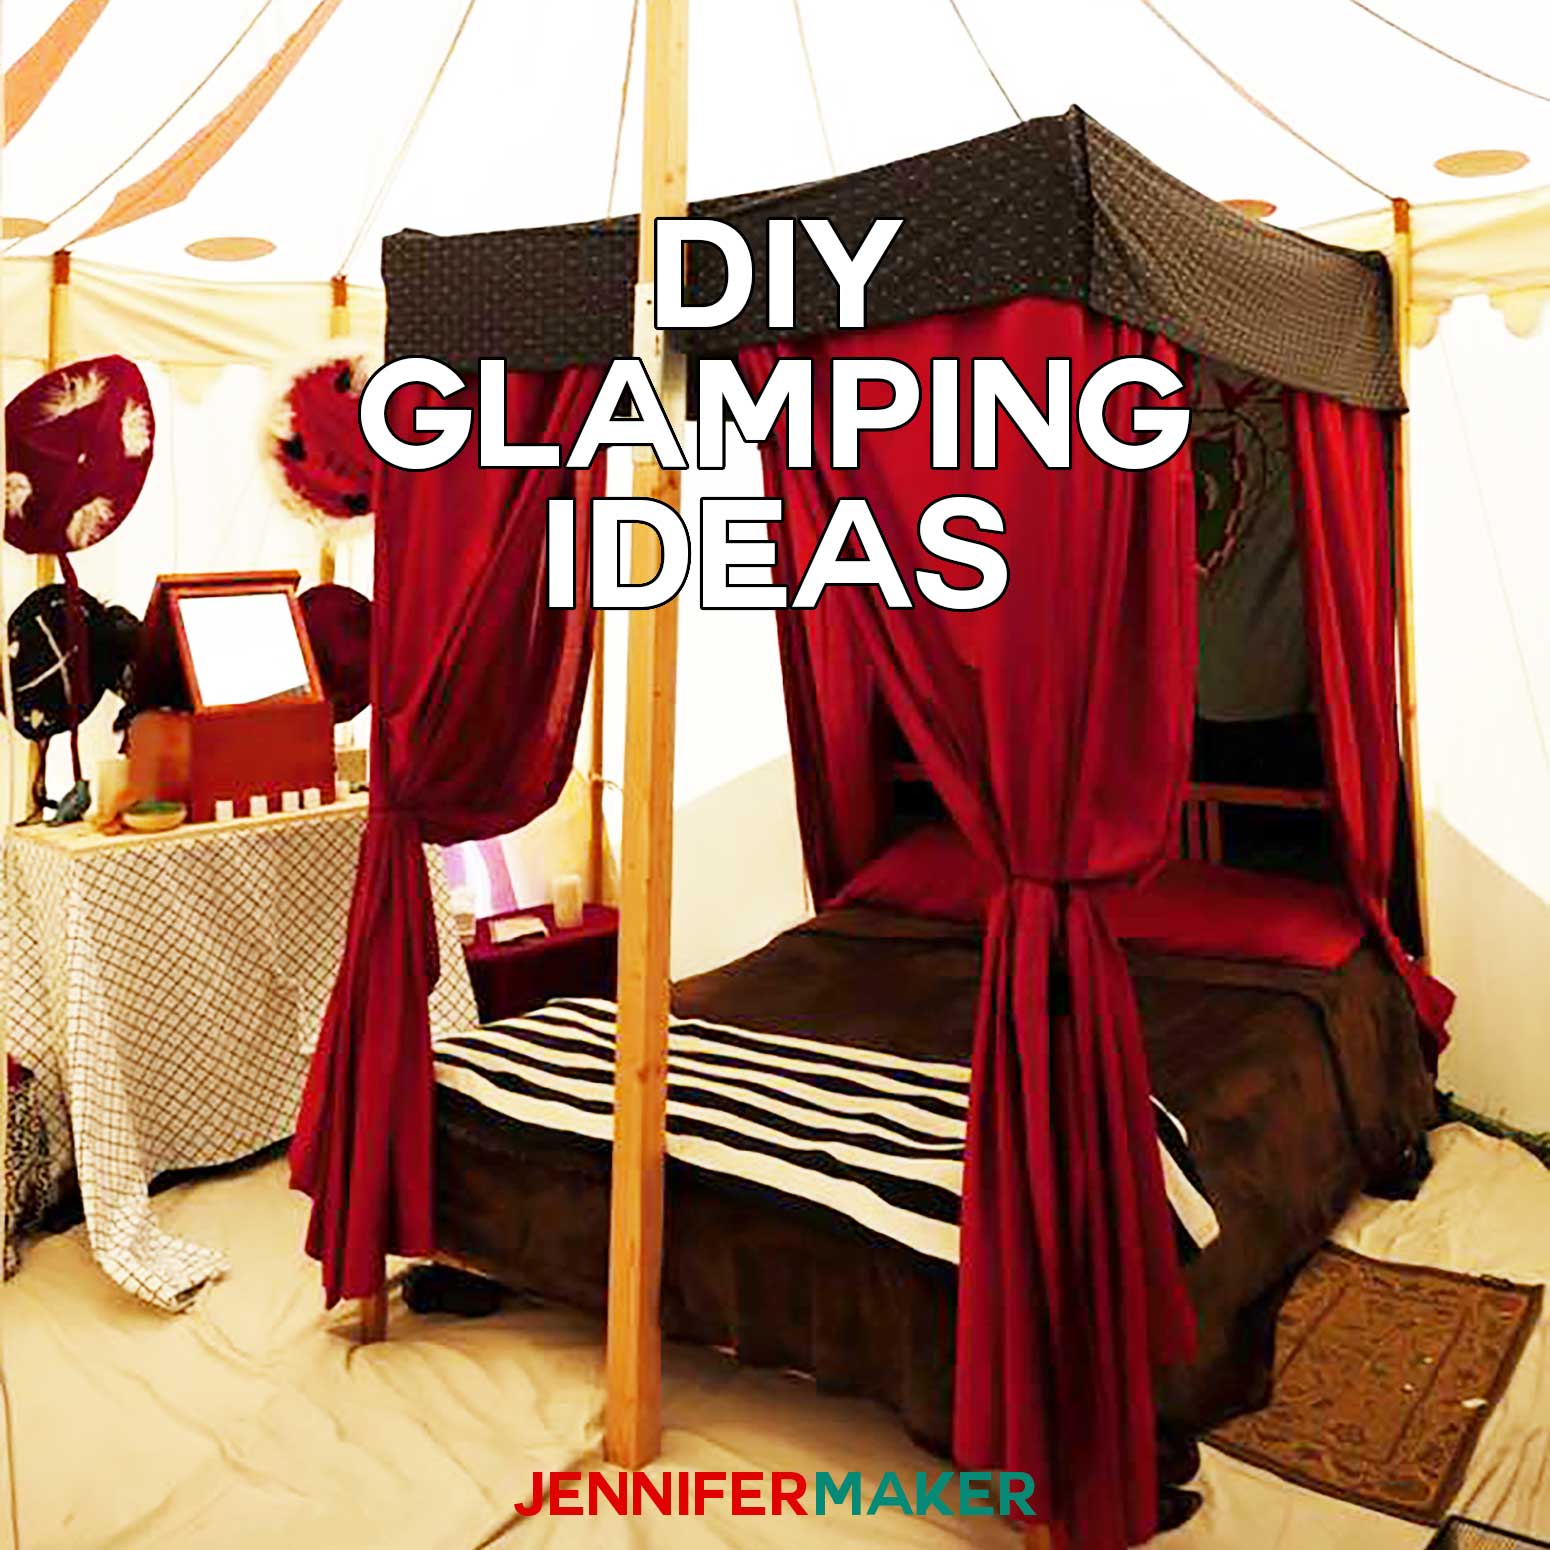 DIY Glamping Ideas: How to Glamp in Style